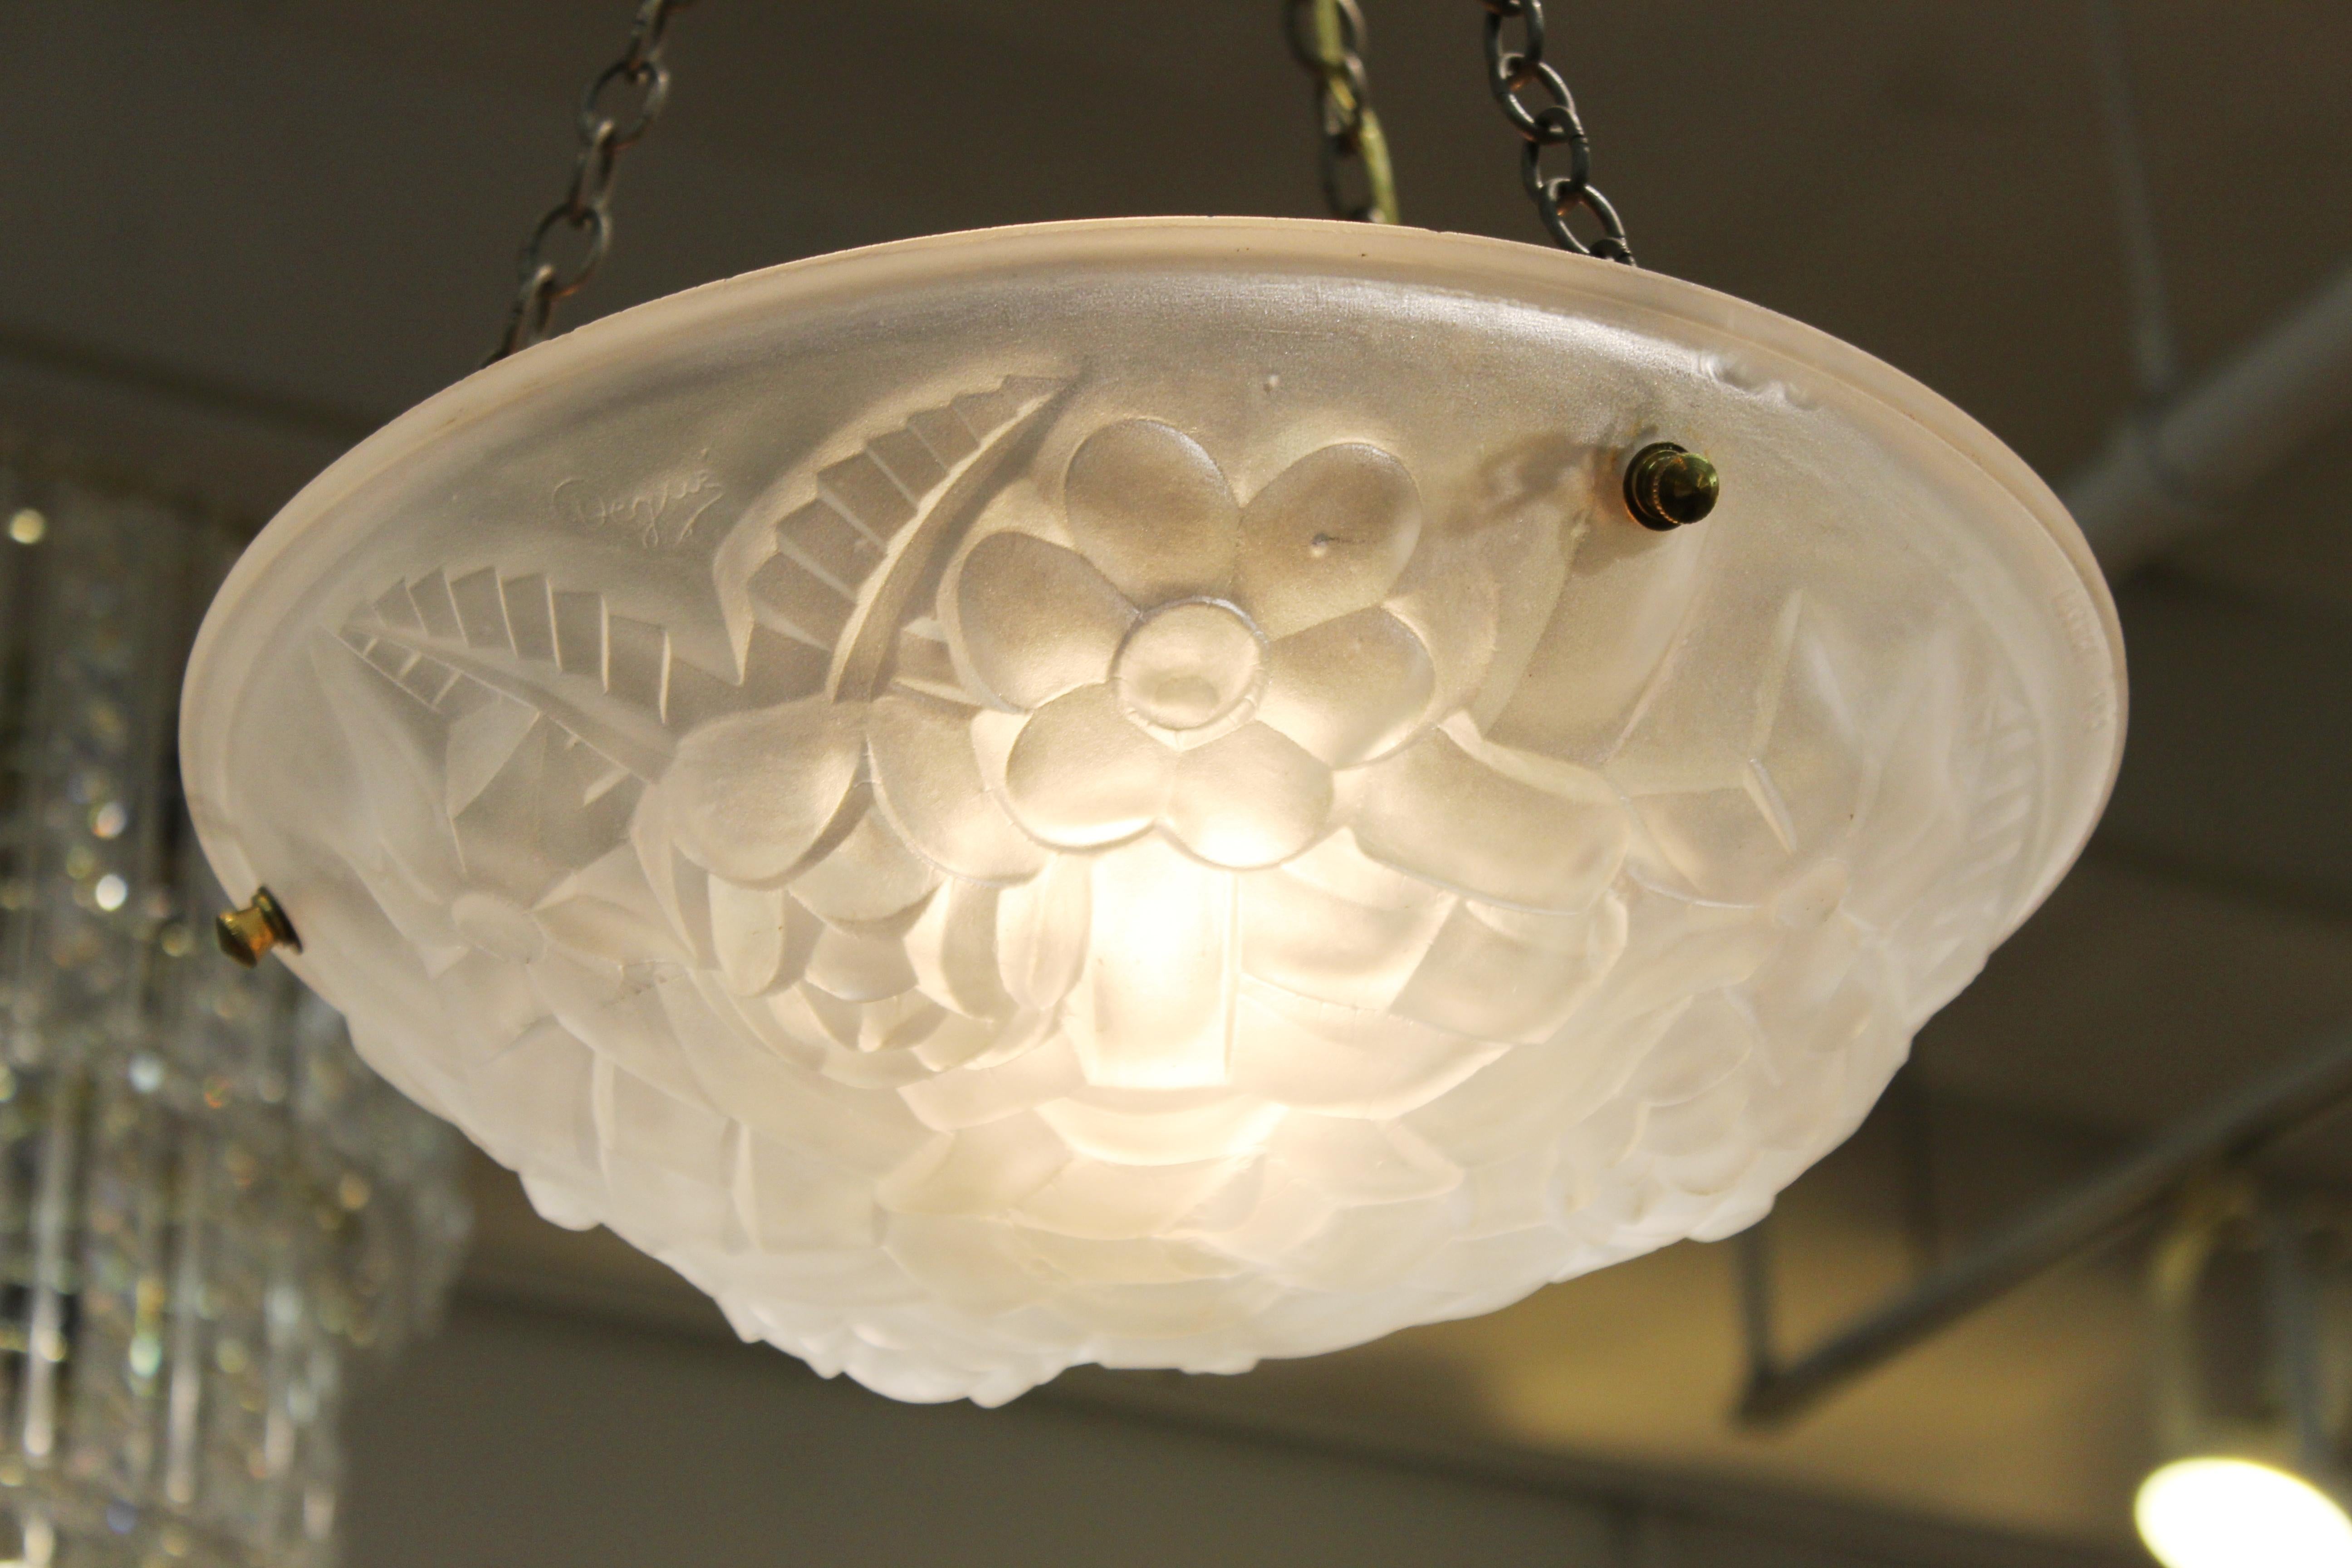 French Art Deco ceiling pendant with a frosted glass bowl pendant with floral themed relief, made by Degué in France during the 1920s. The bowl is suspended by three brass chains from a canopy piece and the bowl itself has never been used before.